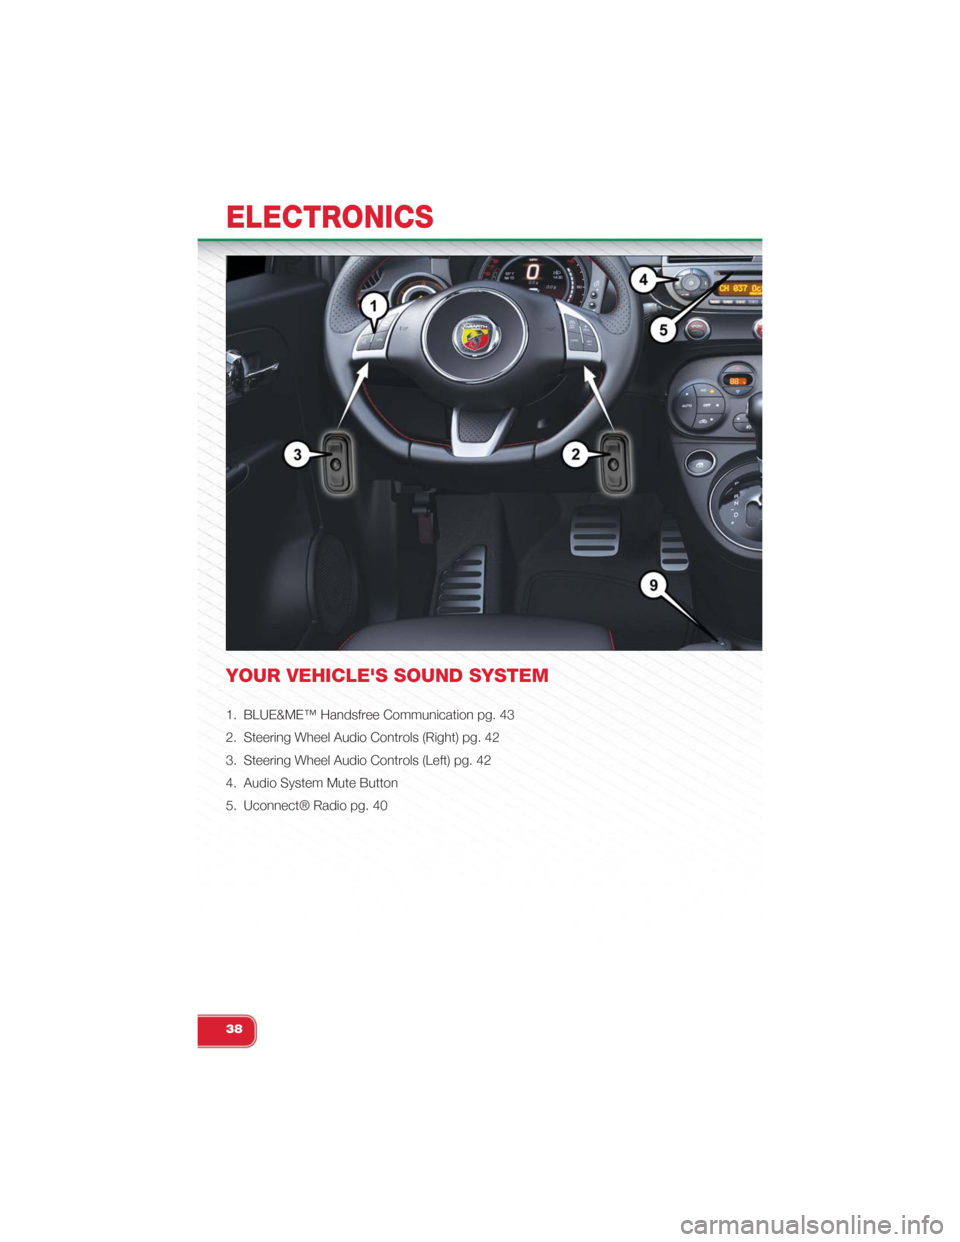 FIAT 500 ABARTH 2015 2.G Owners Guide YOUR VEHICLES SOUND SYSTEM
1. BLUE&ME™ Handsfree Communication pg. 43
2. Steering Wheel Audio Controls (Right) pg. 42
3. Steering Wheel Audio Controls (Left) pg. 42
4. Audio System Mute Button
5. U